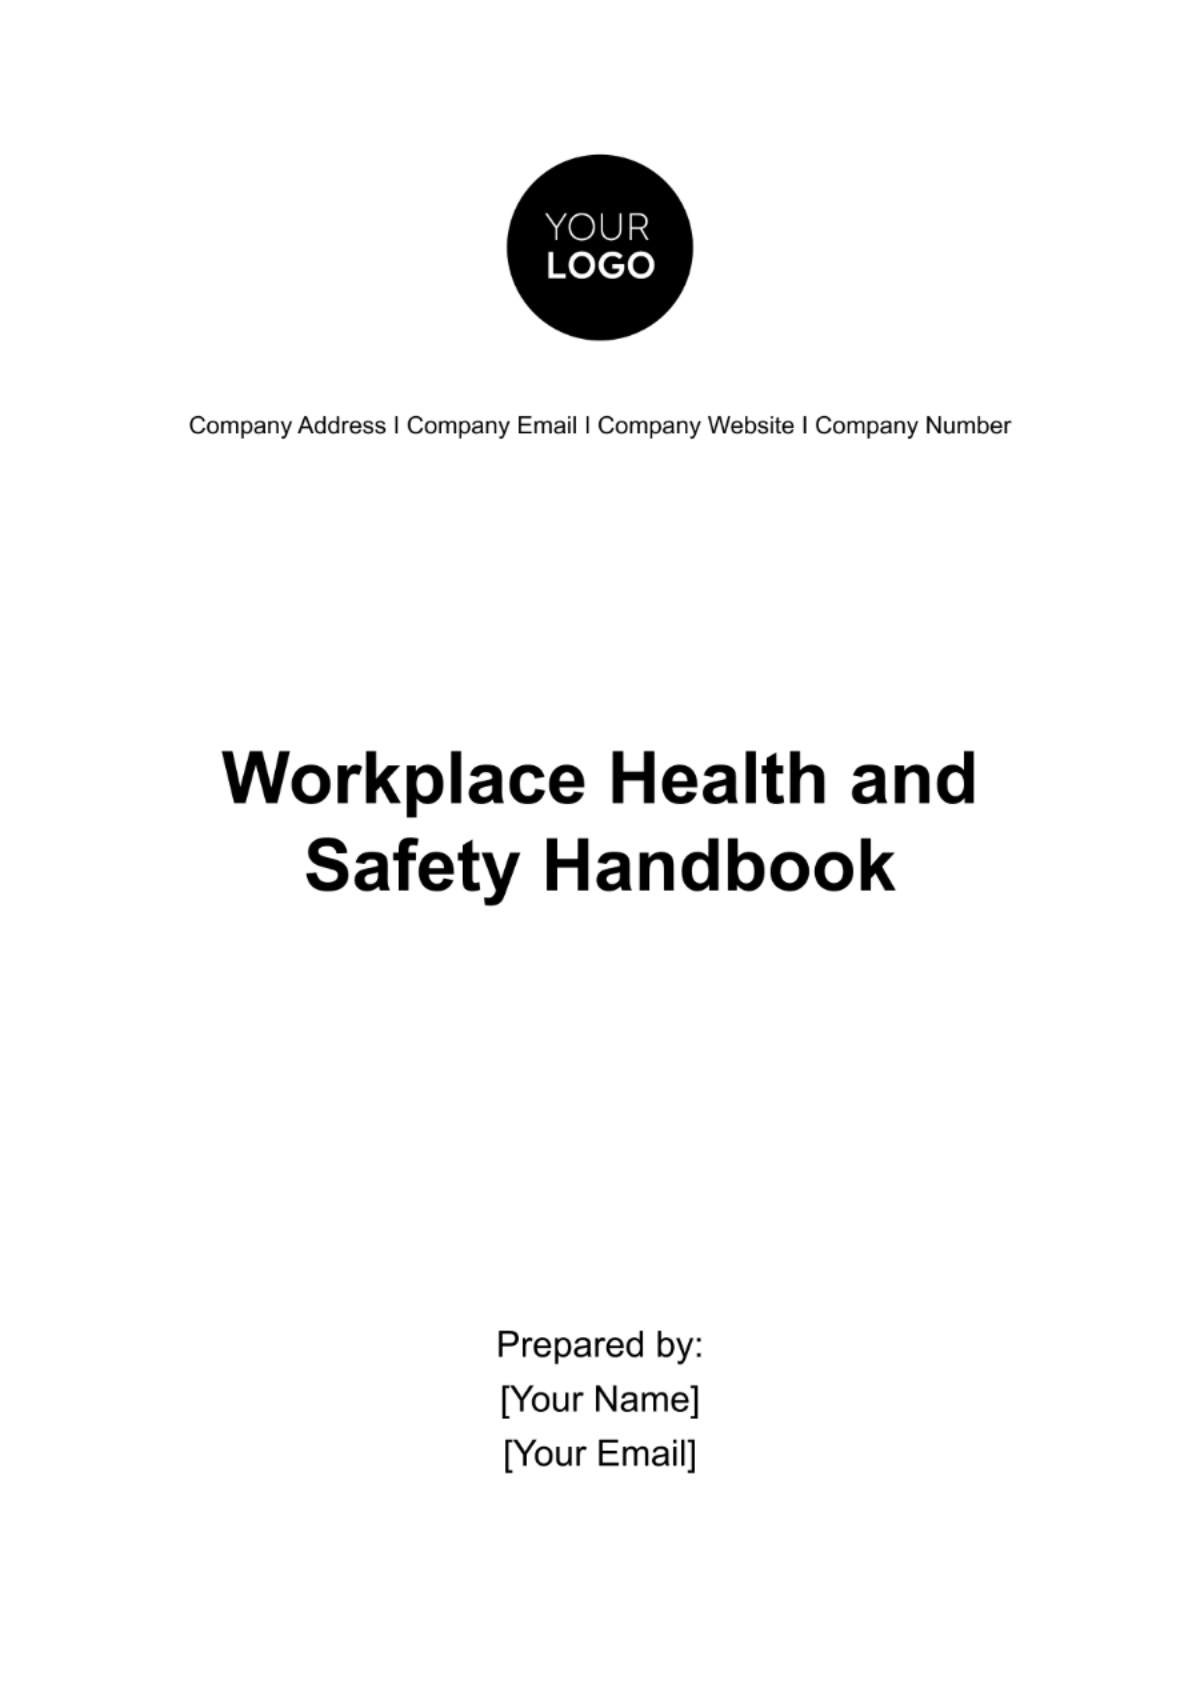 Workplace Health and Safety Handbook Template